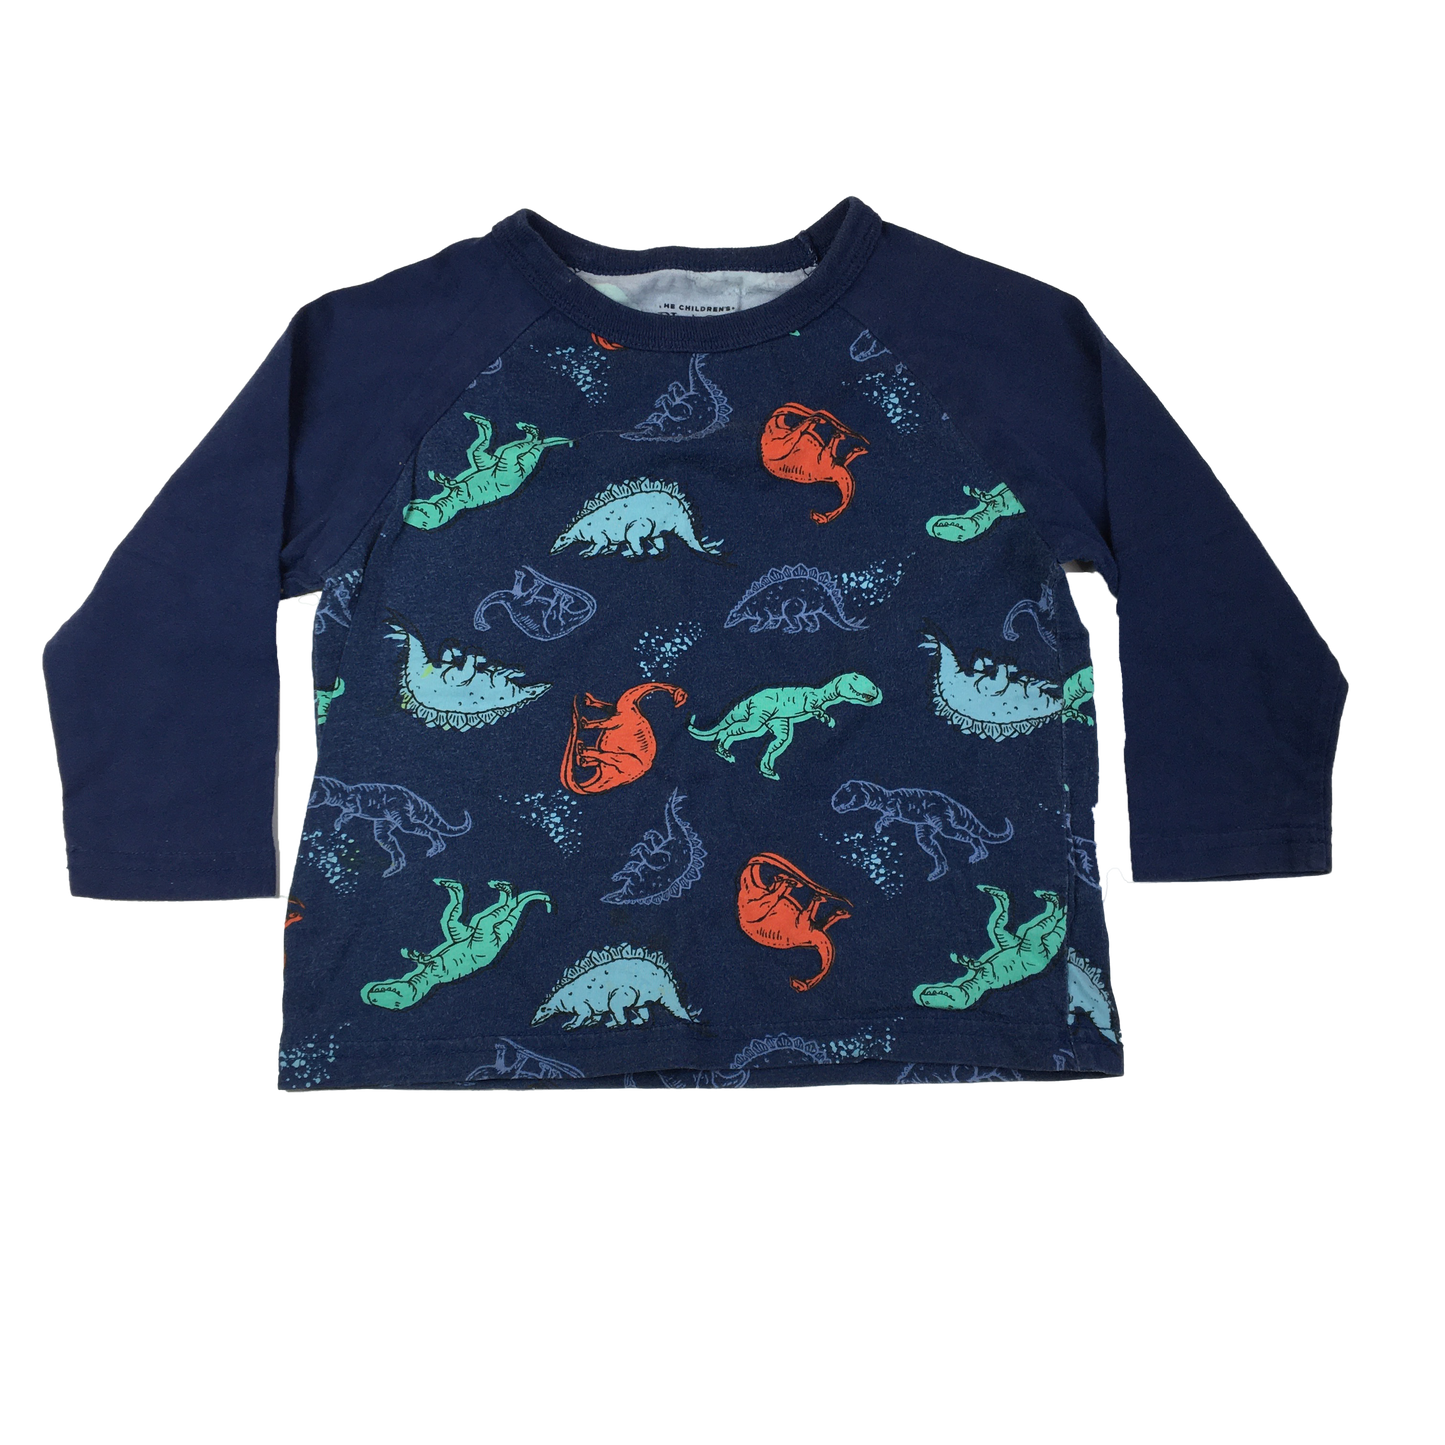 Place Navy Long Sleeve Shirt with Dinosaurs 12-18M